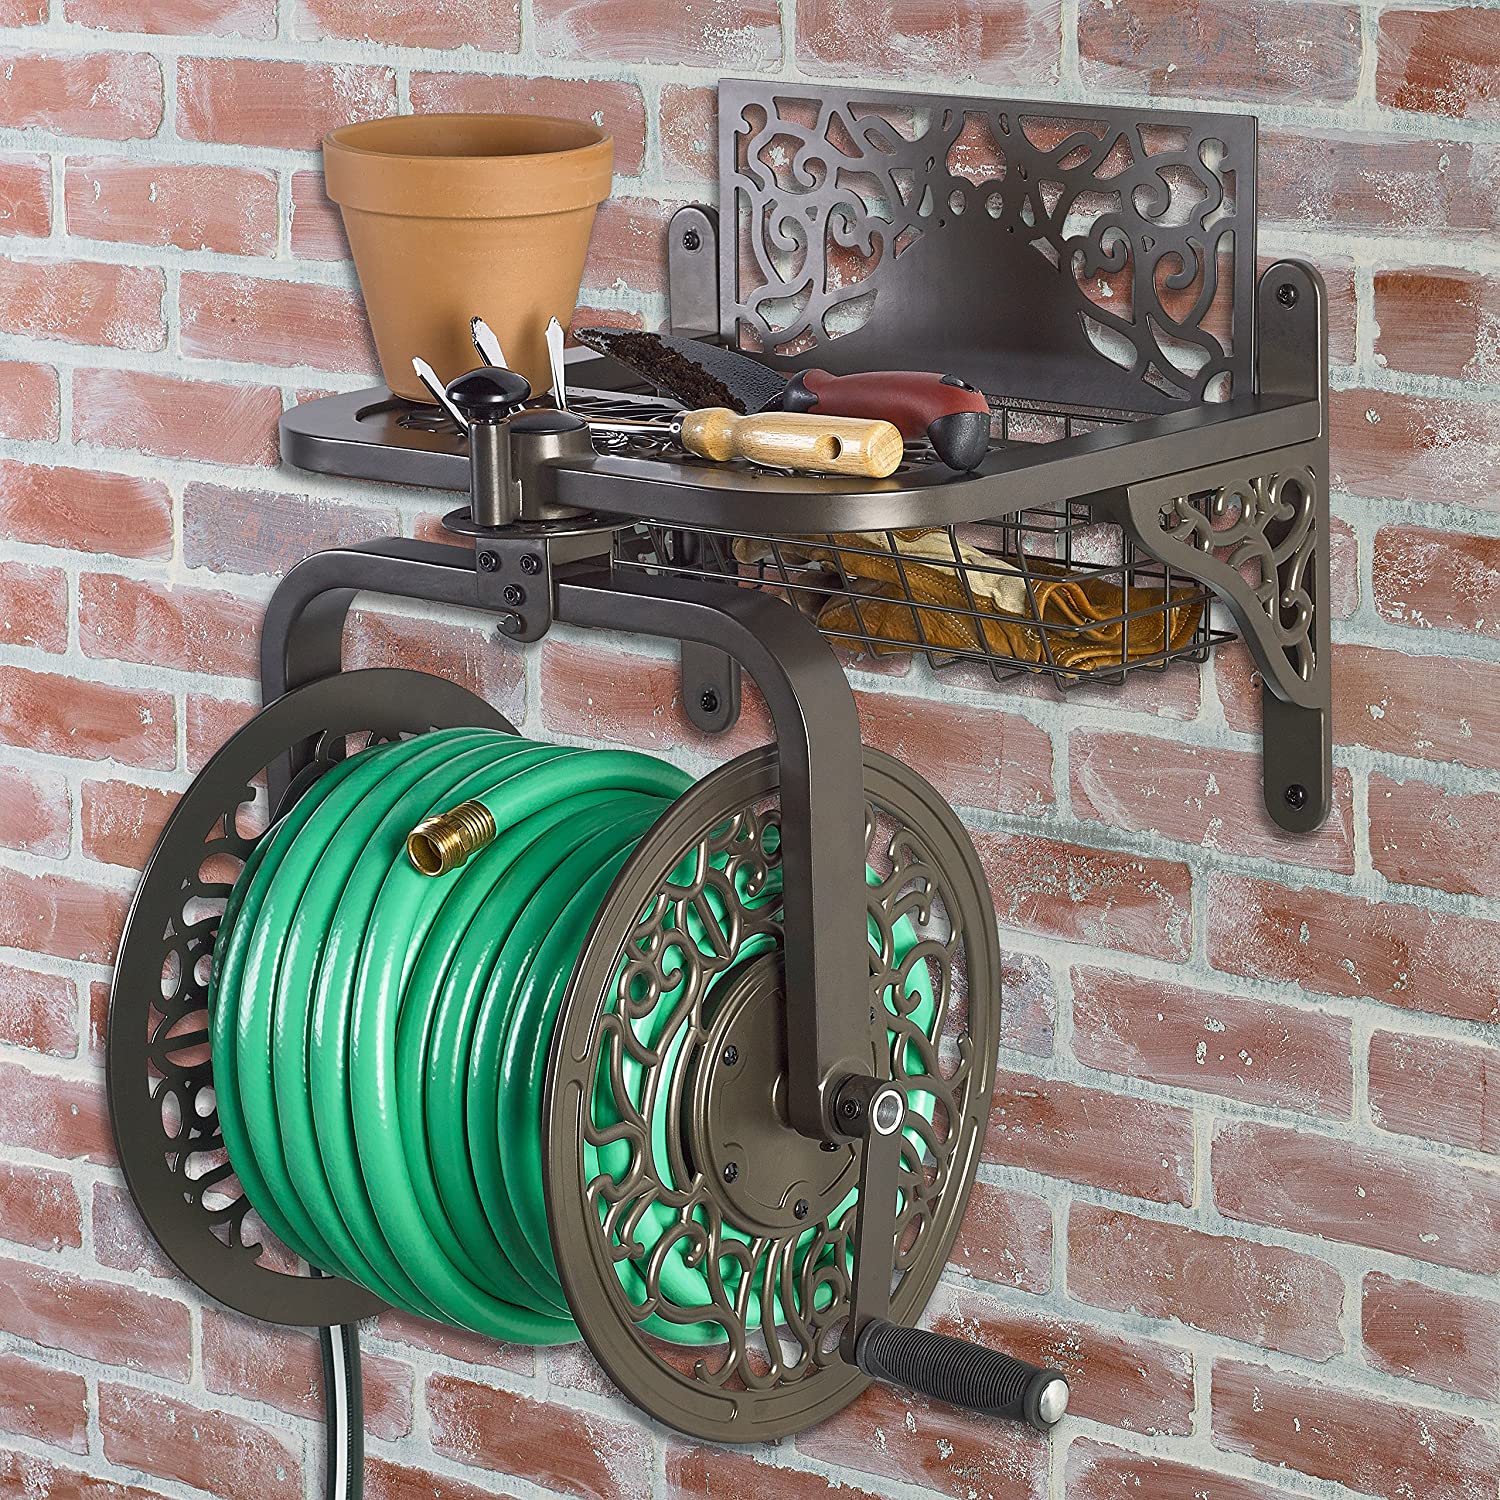 Clever Ways to Store Your Garden Hose - My Life Abundant